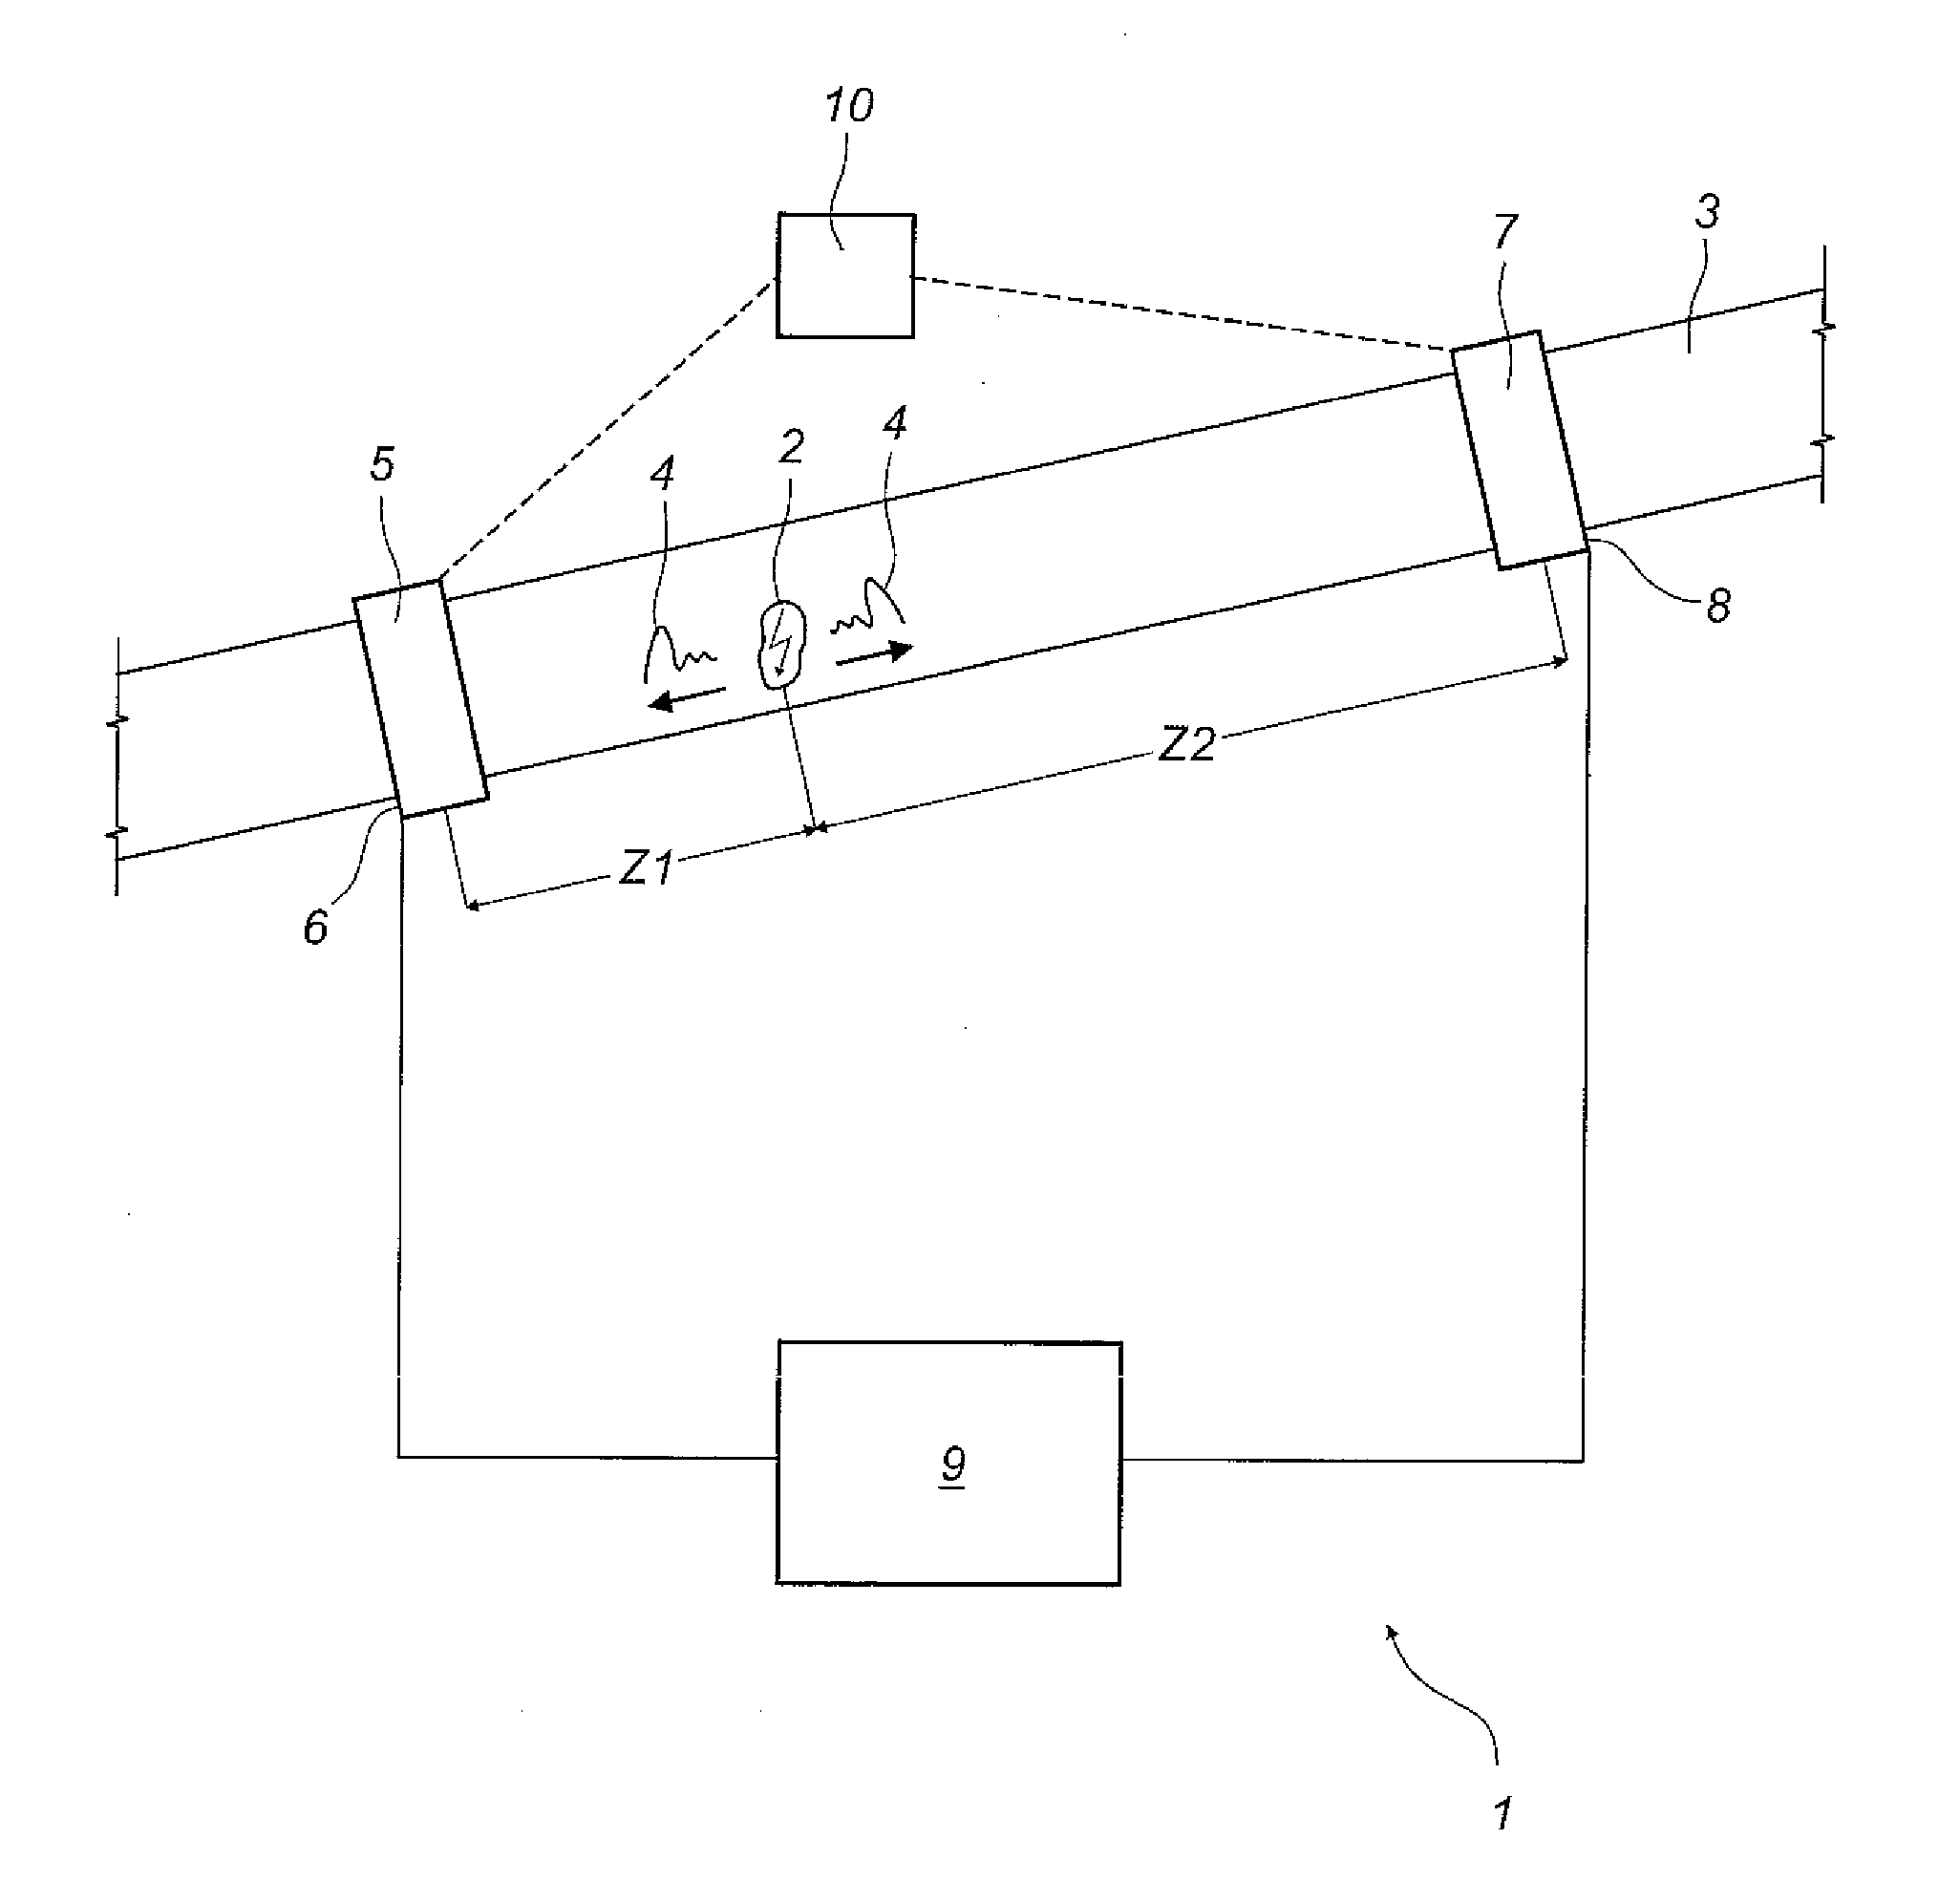 Device and method for locating partial discharges